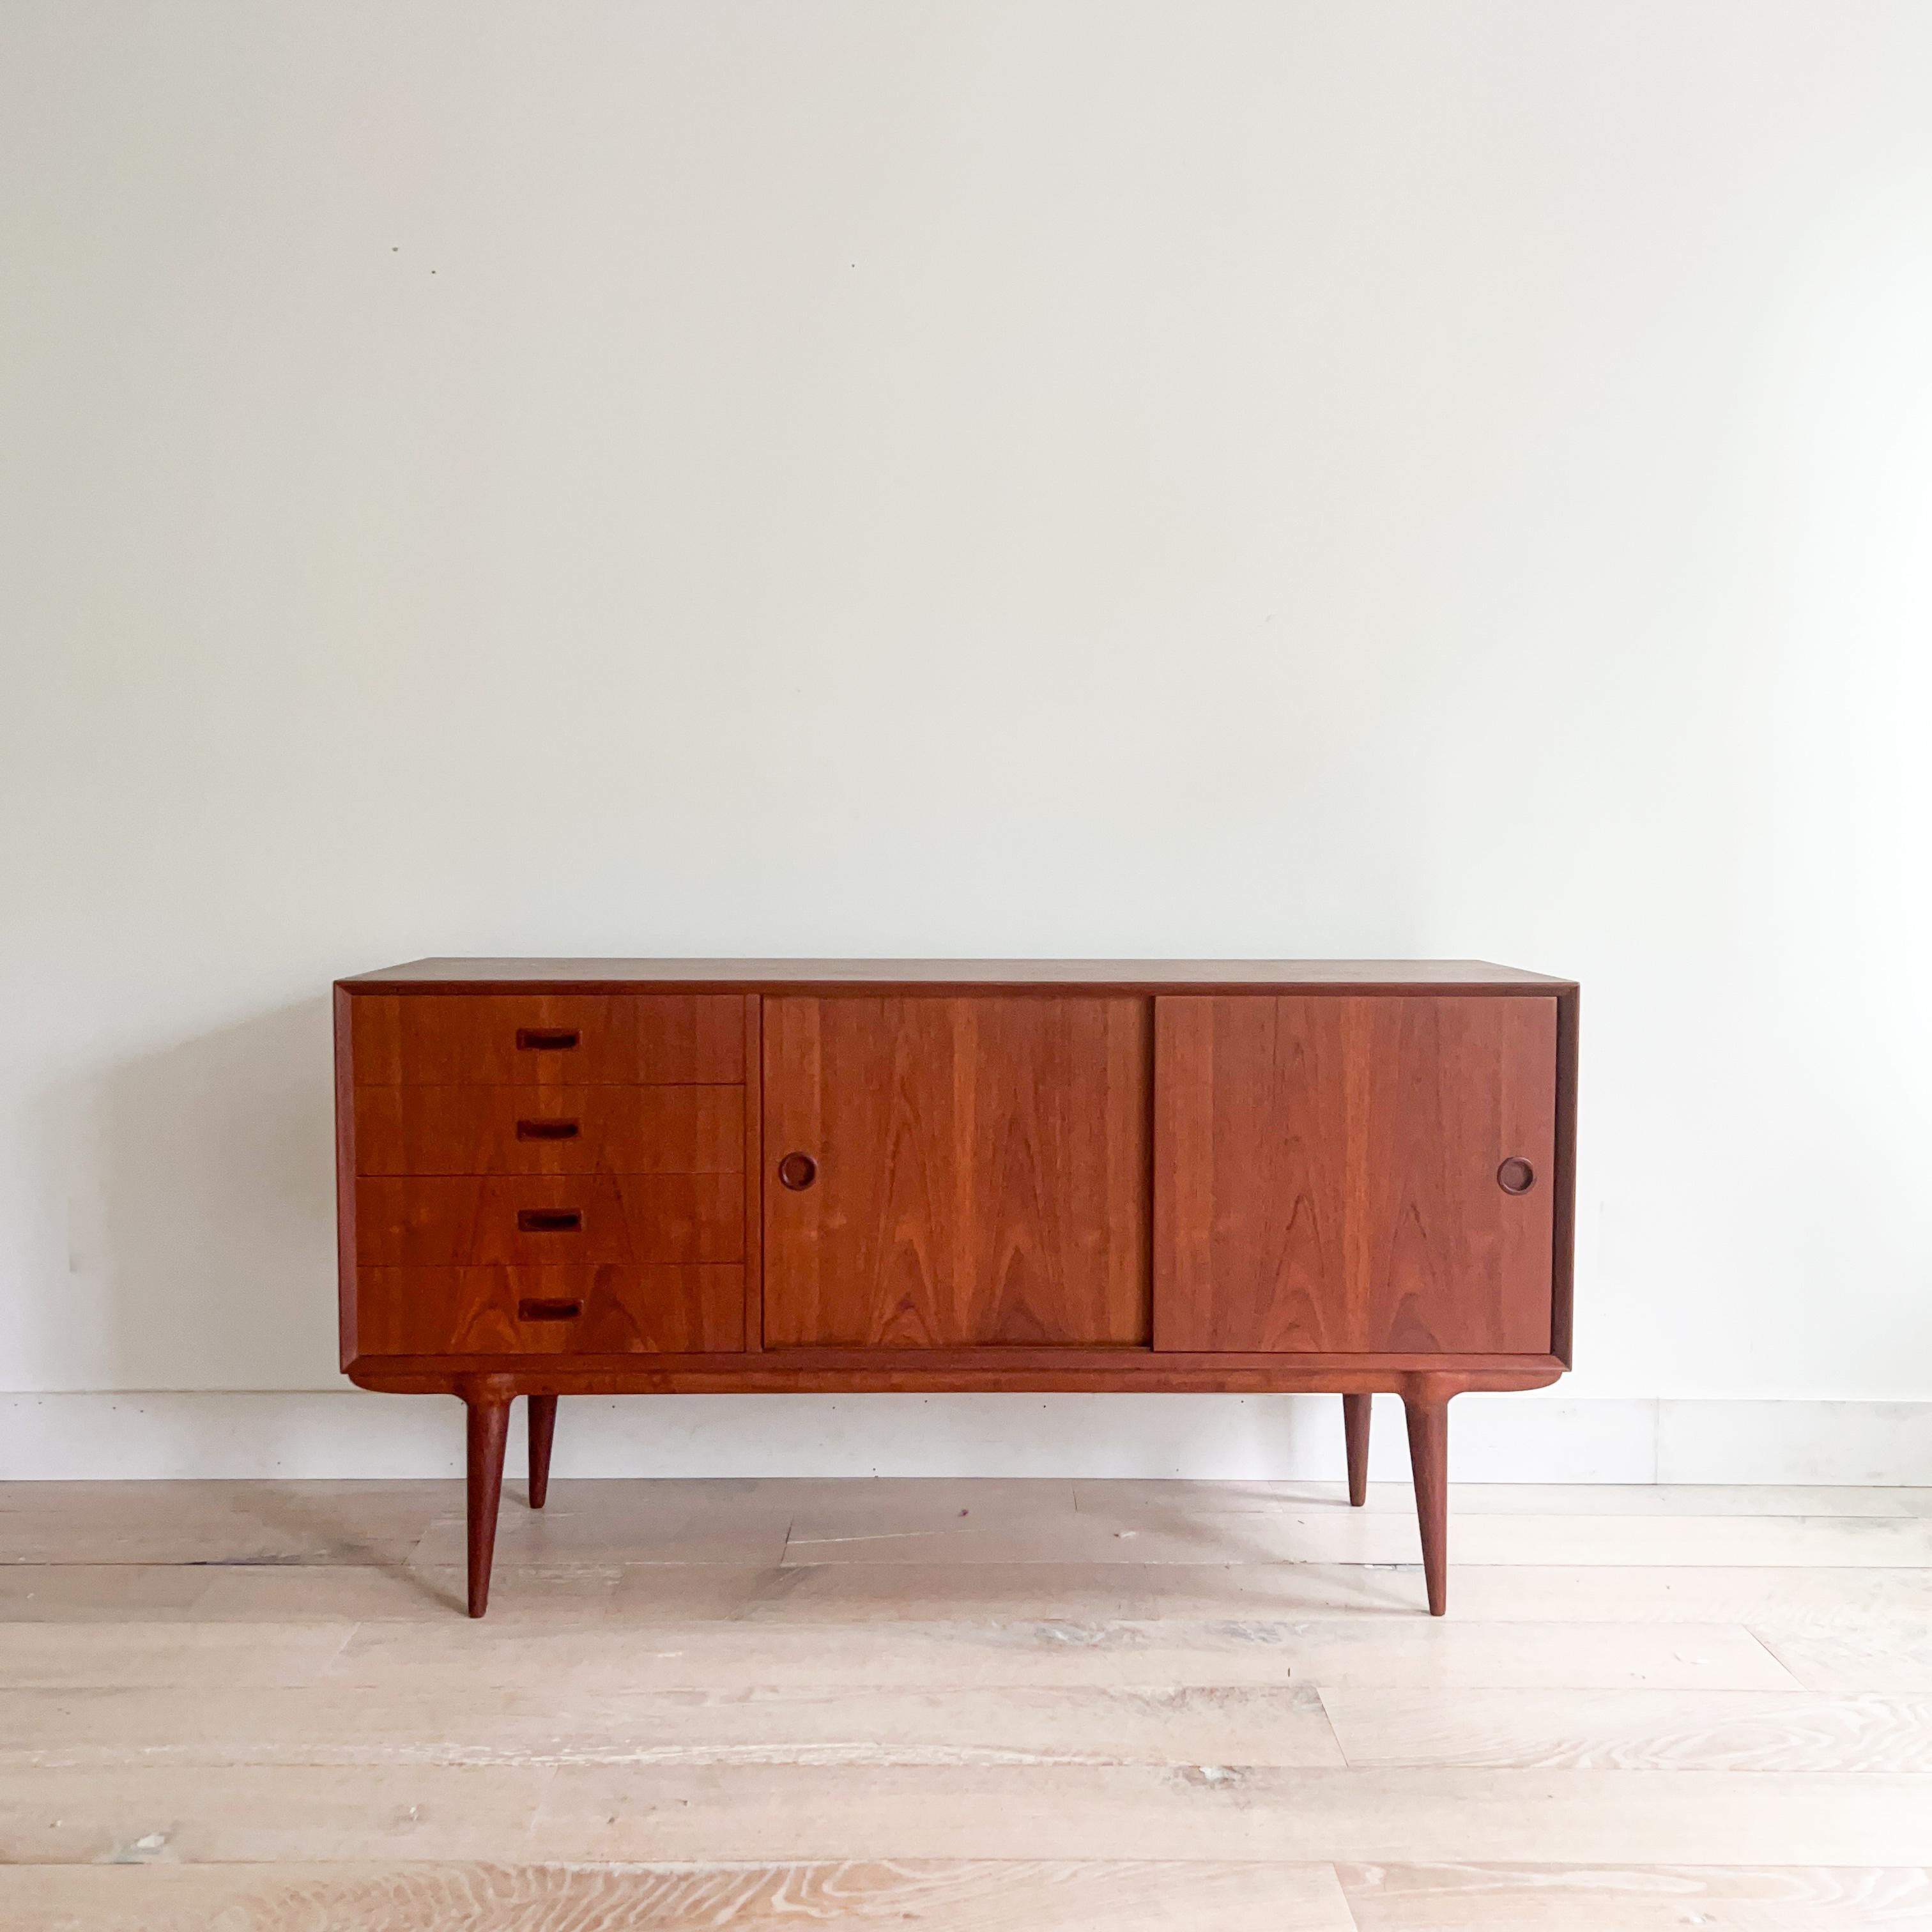 This stunning mid-century modern credenza, designed by Gunni Omann, features elegant teak construction with smooth sliding doors. Adjustable shelving behind the sliding doors offers versatile storage, and the drawers open and close effortlessly.